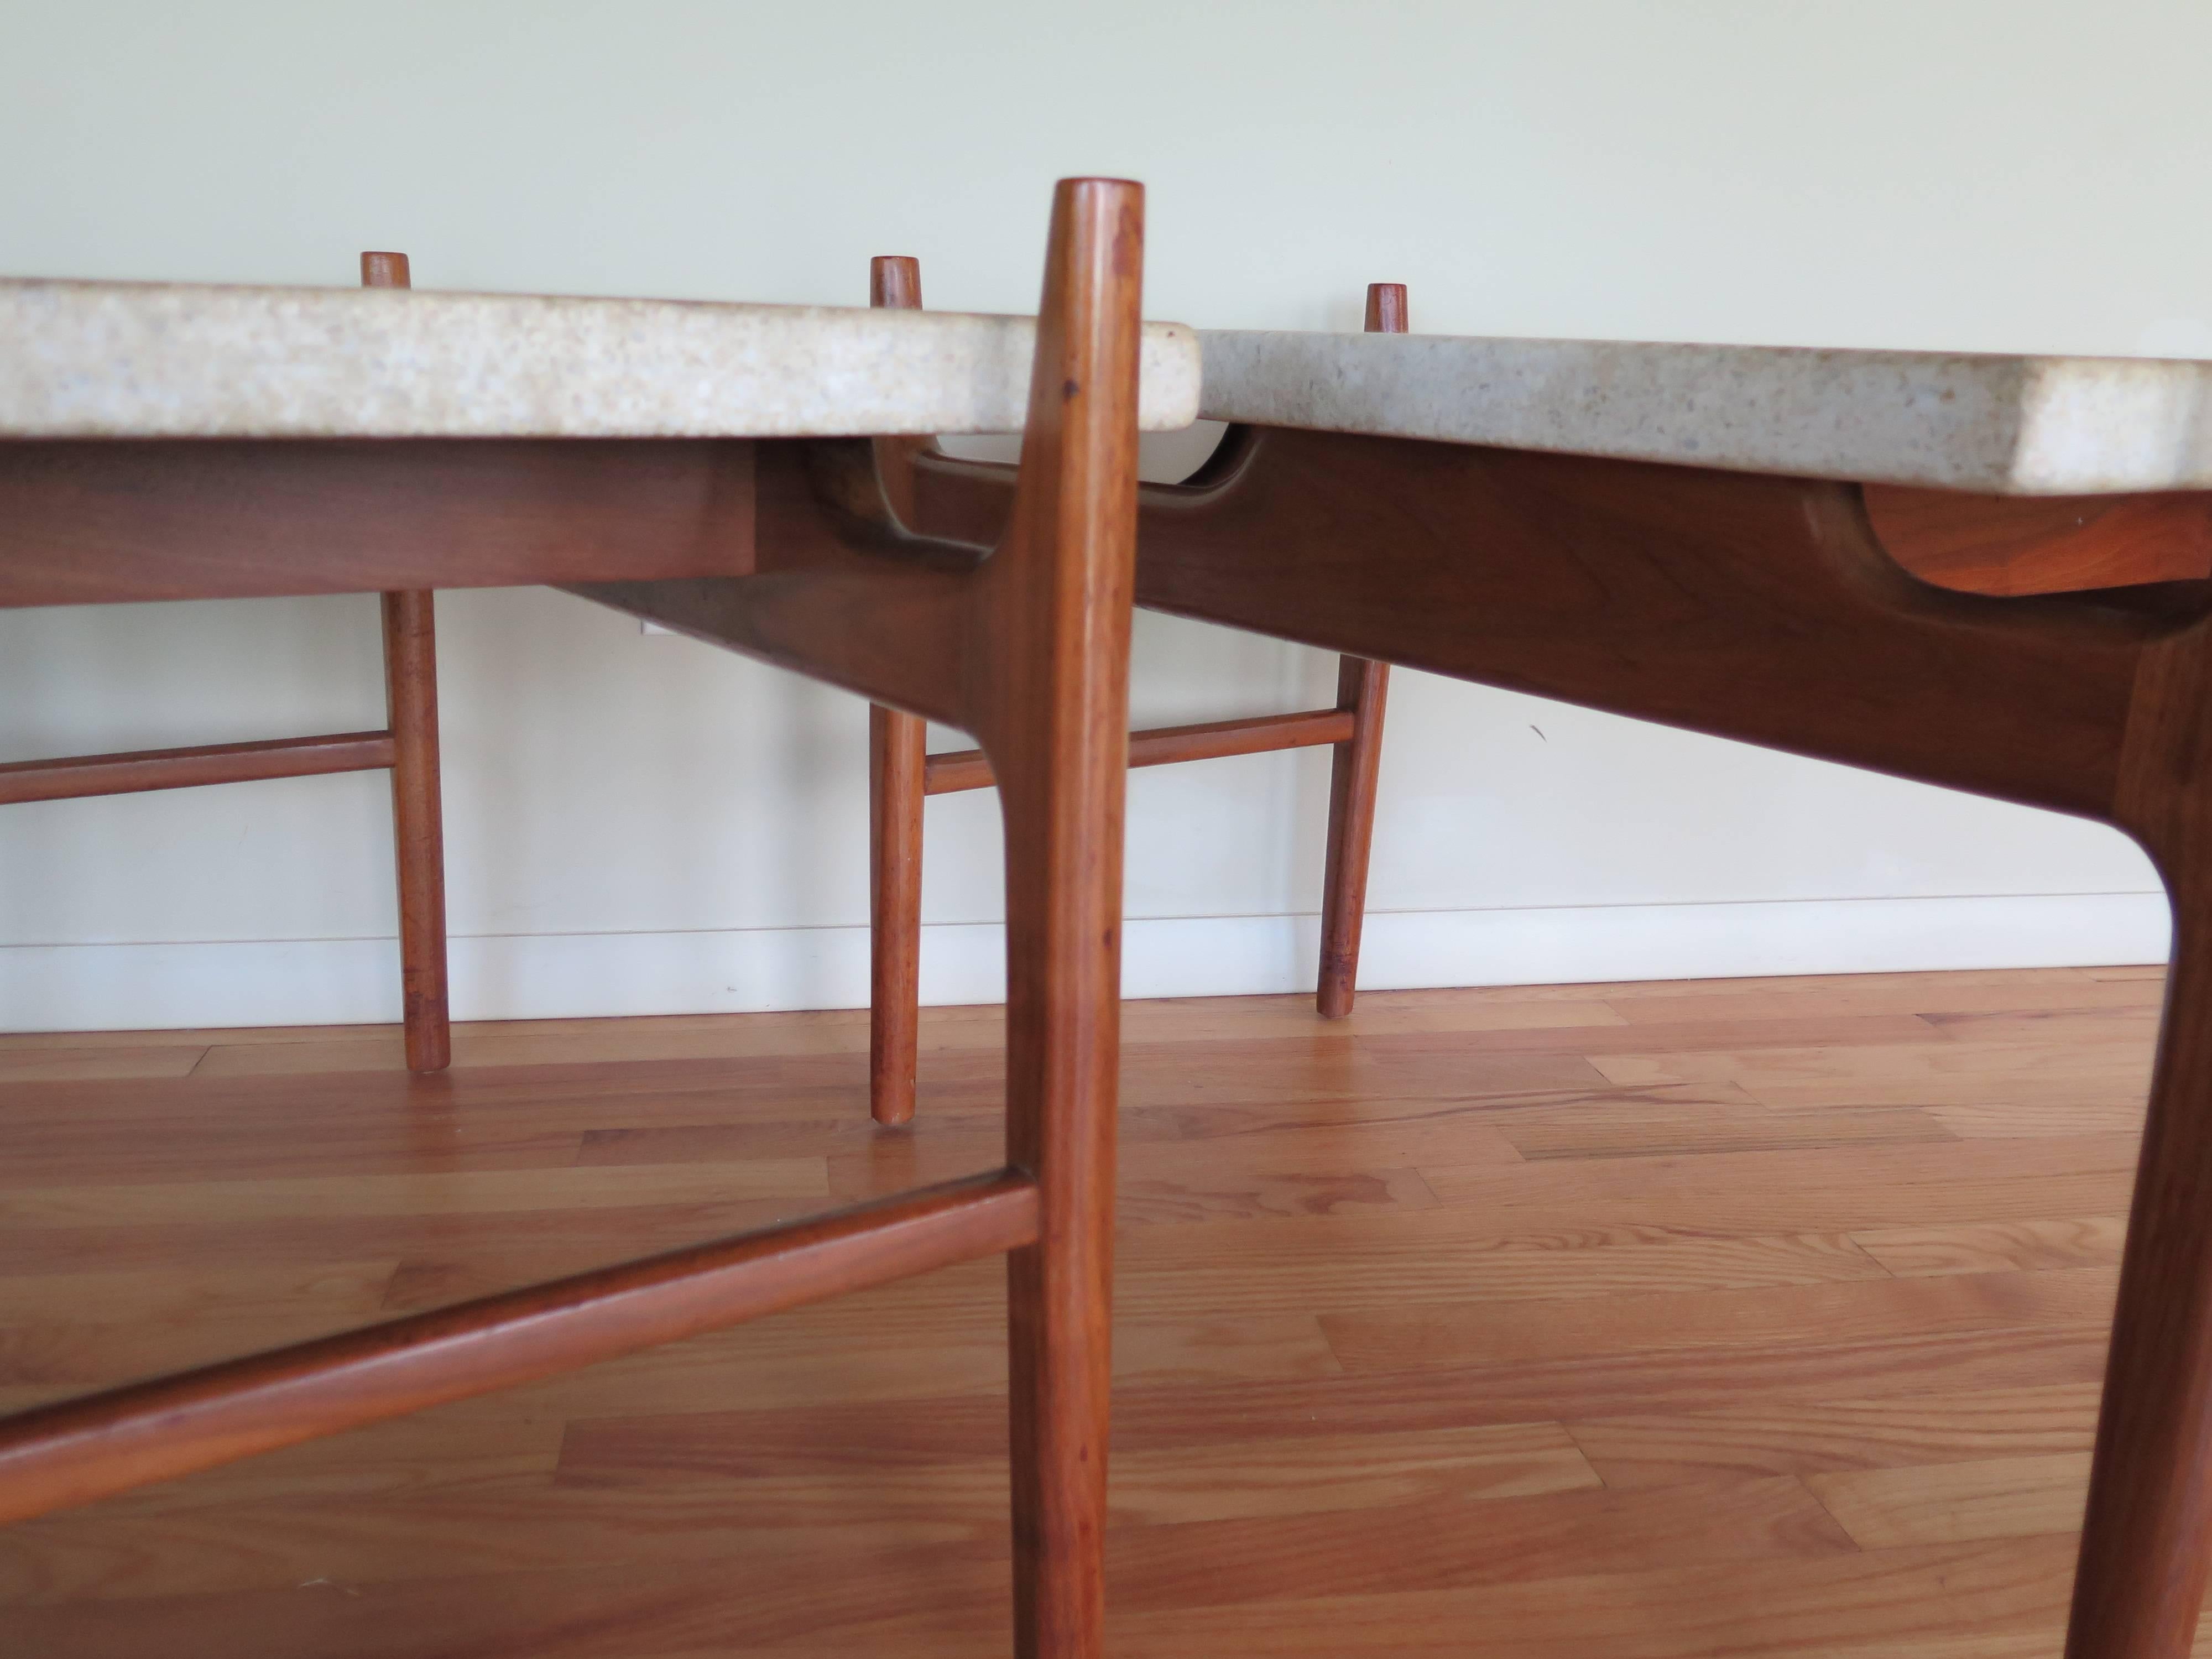 A pair of rare Harvey Probber terrazzo tables. Floating trapezoid tops on organic walnut frames.